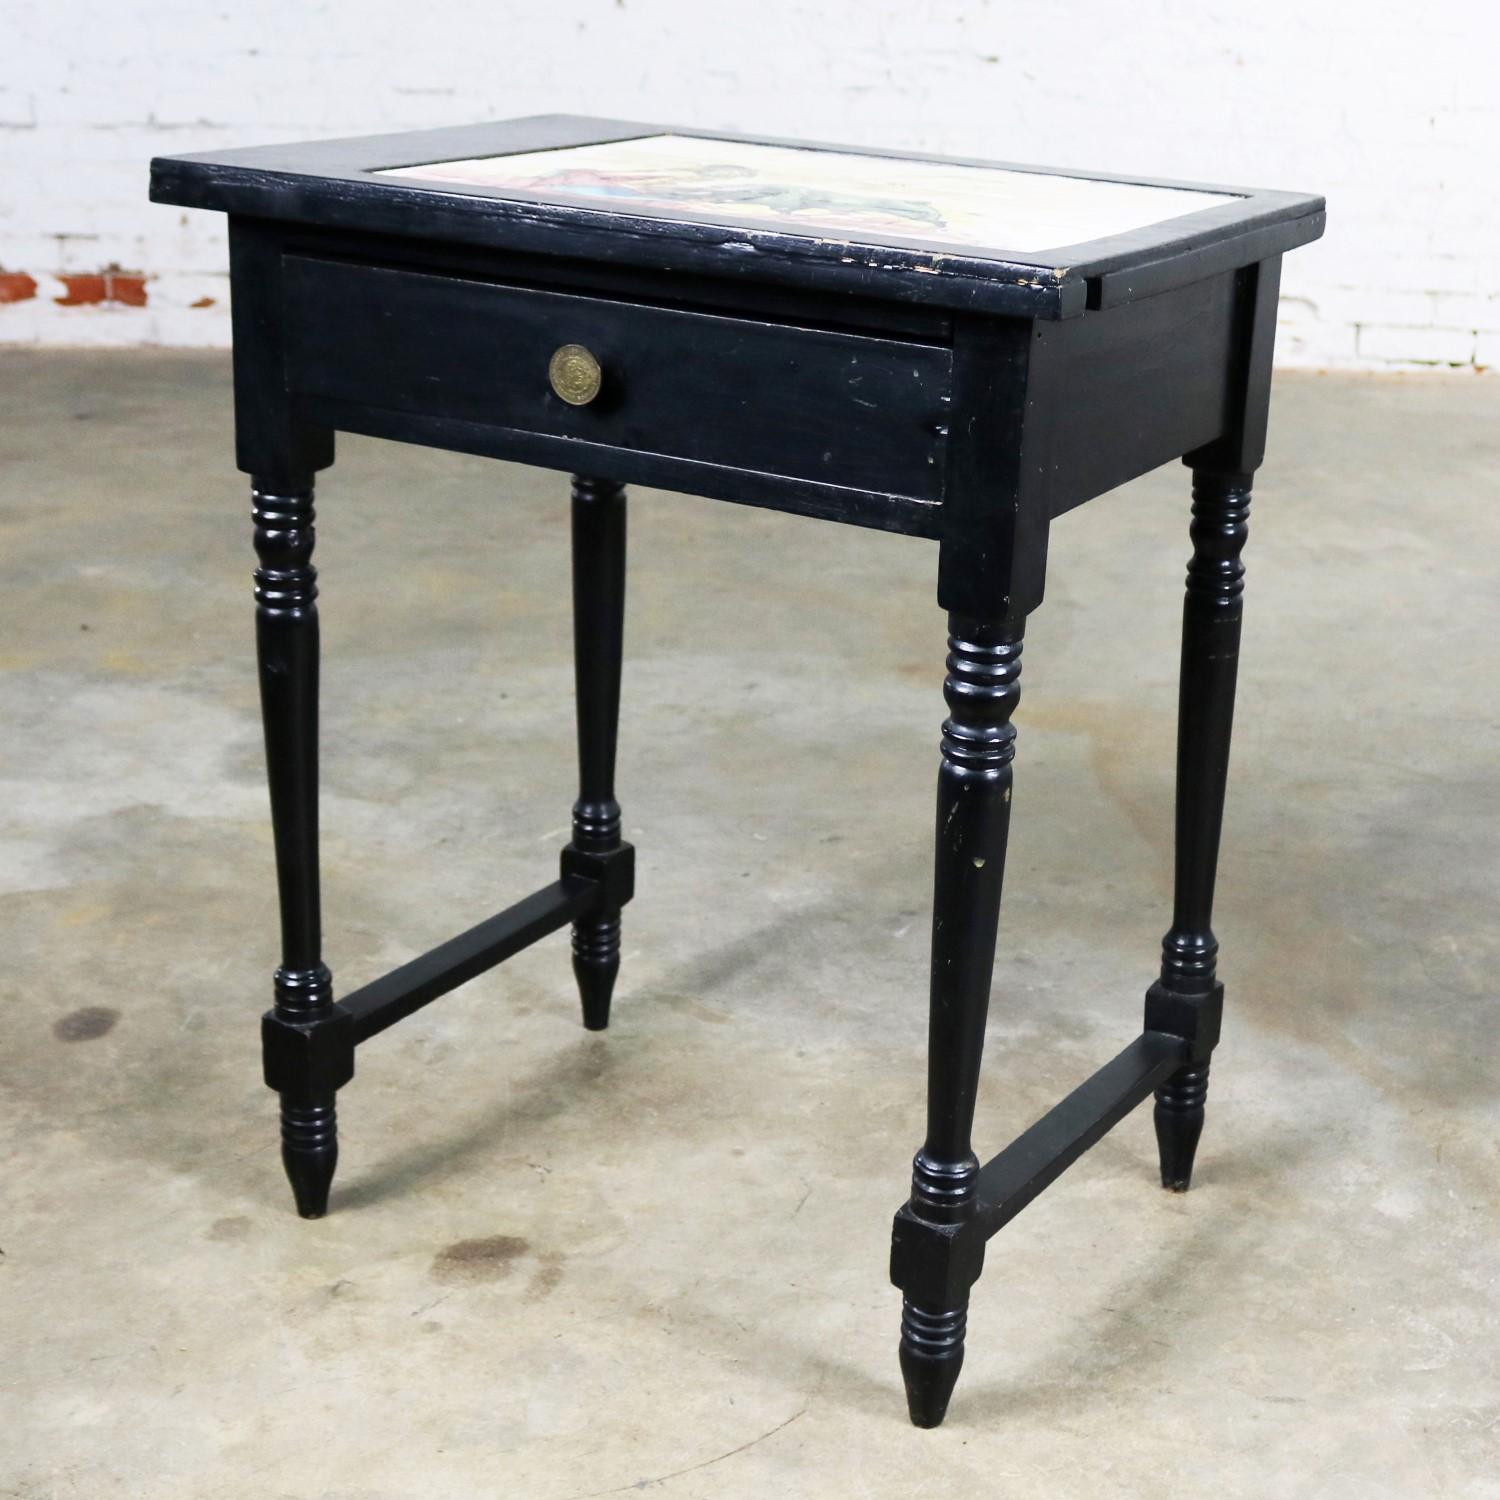 Awesome and unusual vintage end table, side table, or bedside table. Undoubtedly made in Mexico. It has a black painted finish, turned legs, a drawer, and an eight-piece signed tile insert in the top depicting a bullfight with both matador and bull.